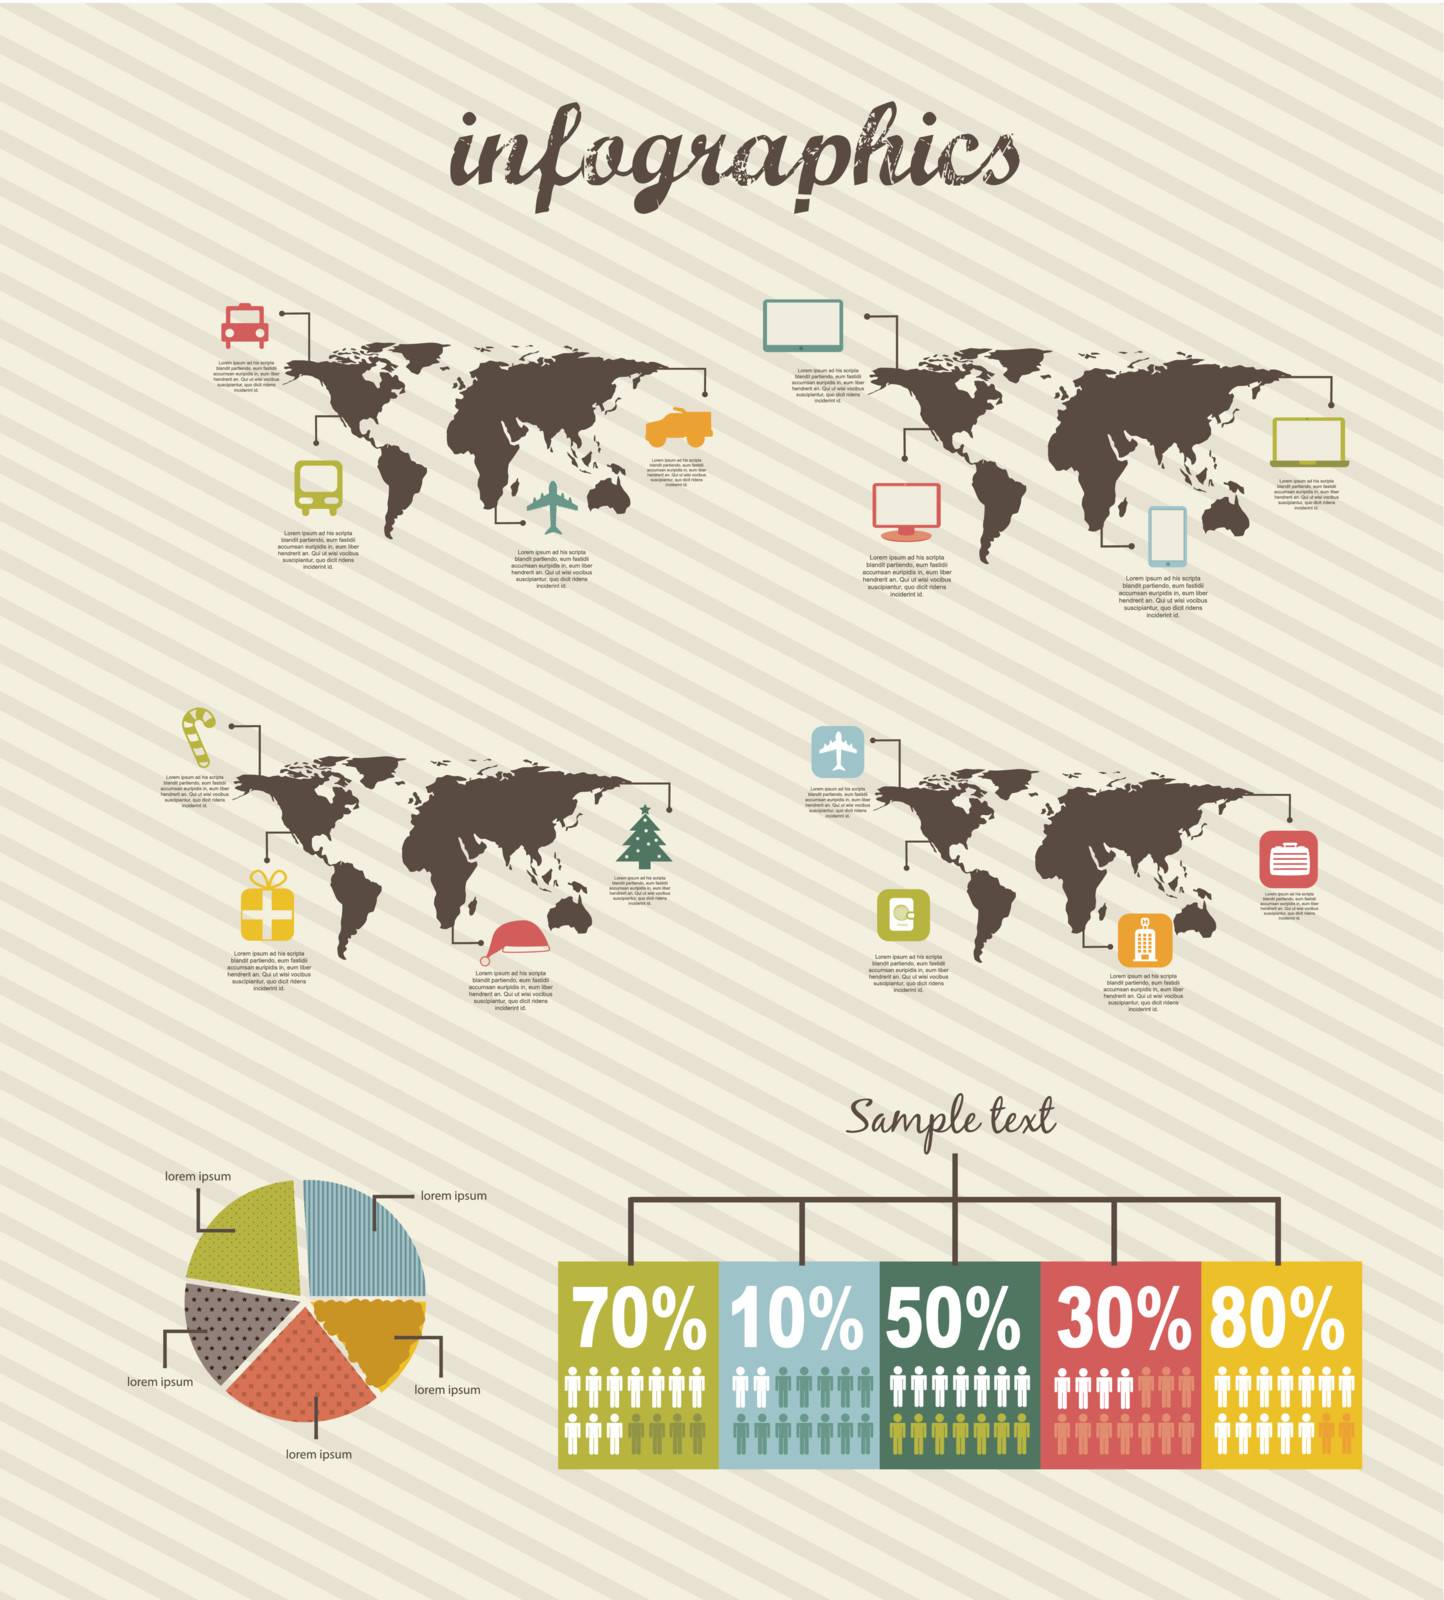 infographics with icons, vintage style. vector illustration